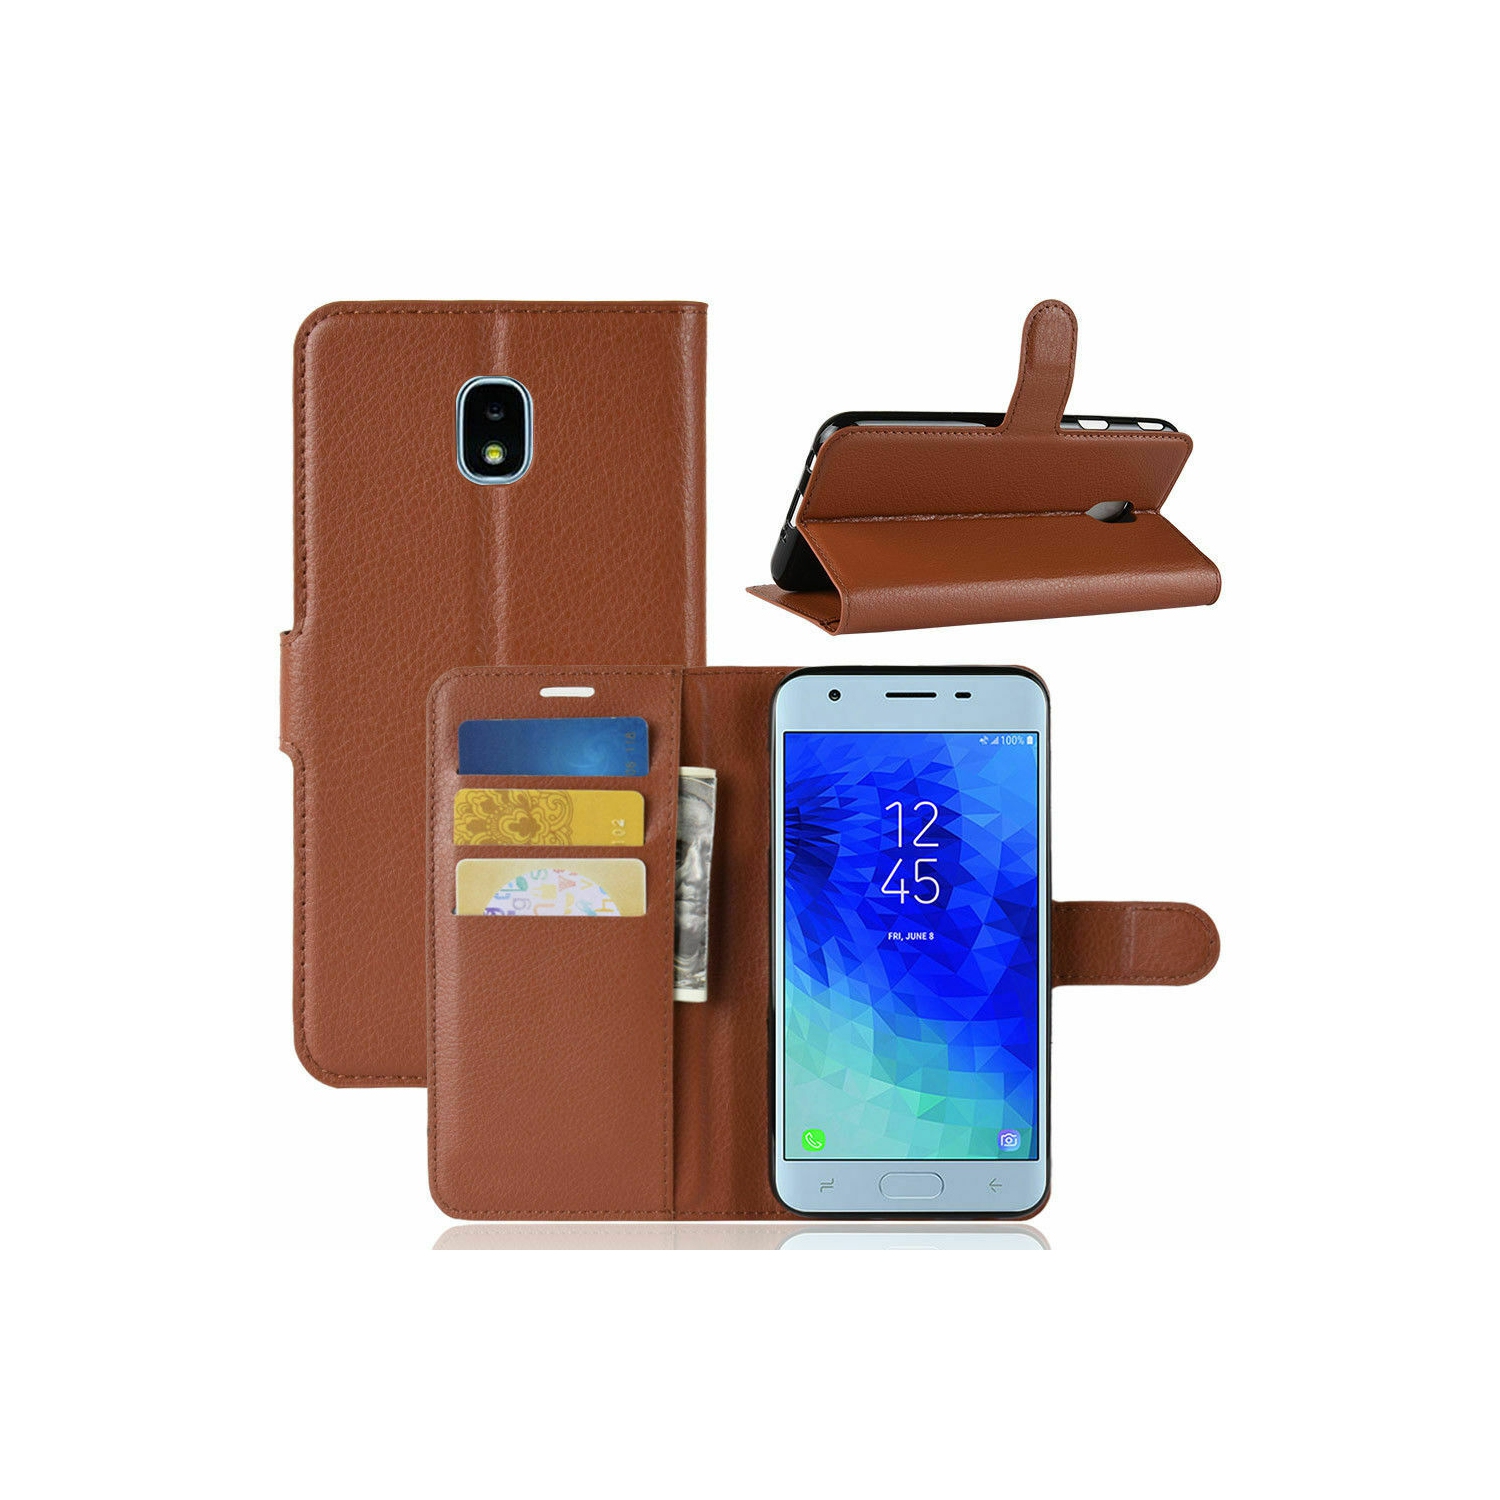 【CSmart】 Magnetic Card Slot Leather Folio Wallet Flip Case Cover for Samsung Galaxy J3 2018, Brown